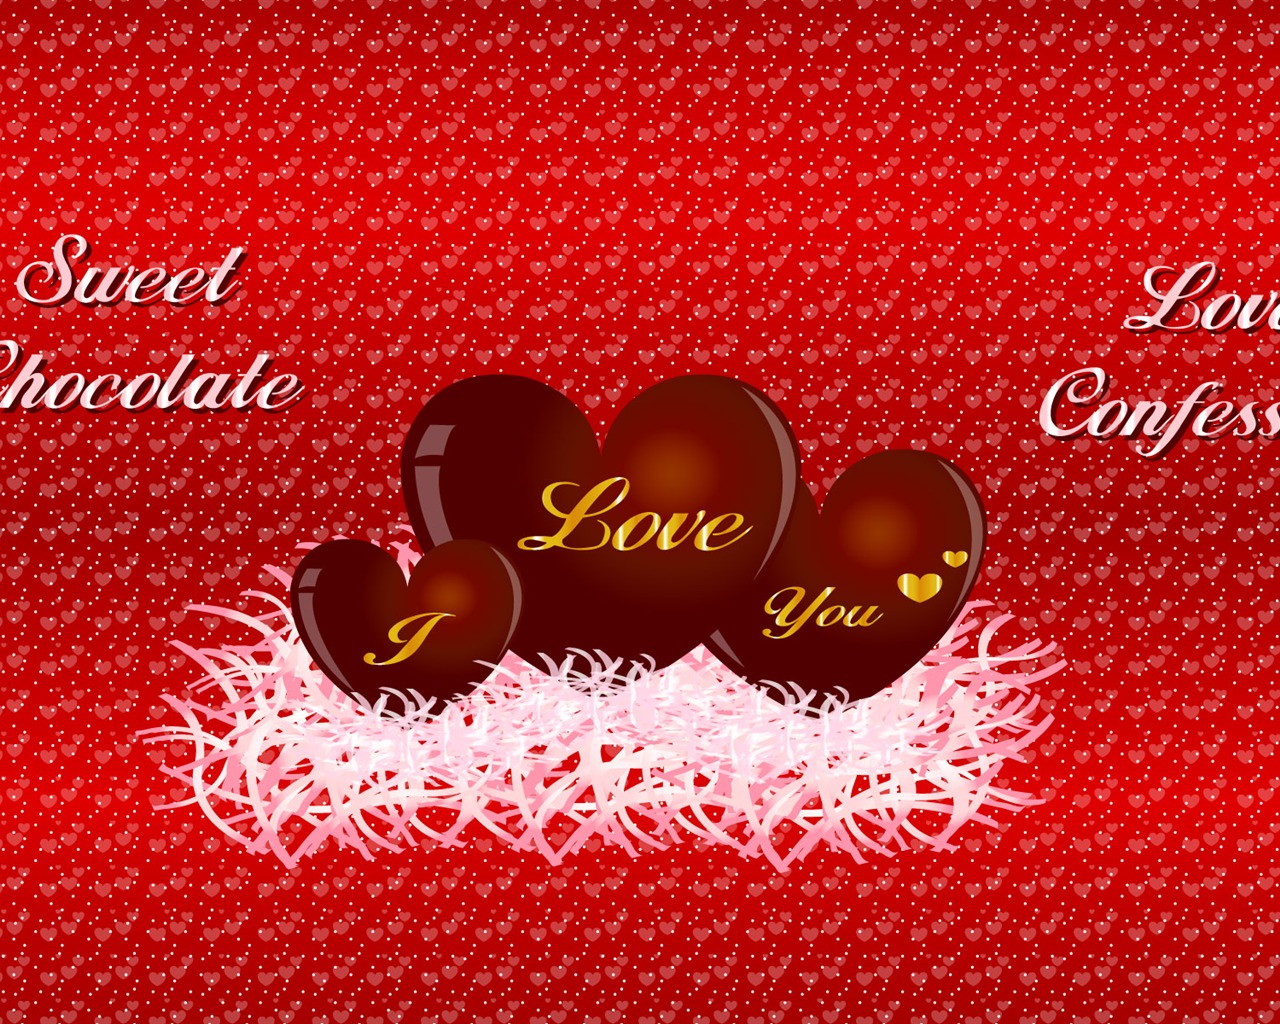 Valentine's Day Theme Wallpapers (1) #15 - 1280x1024